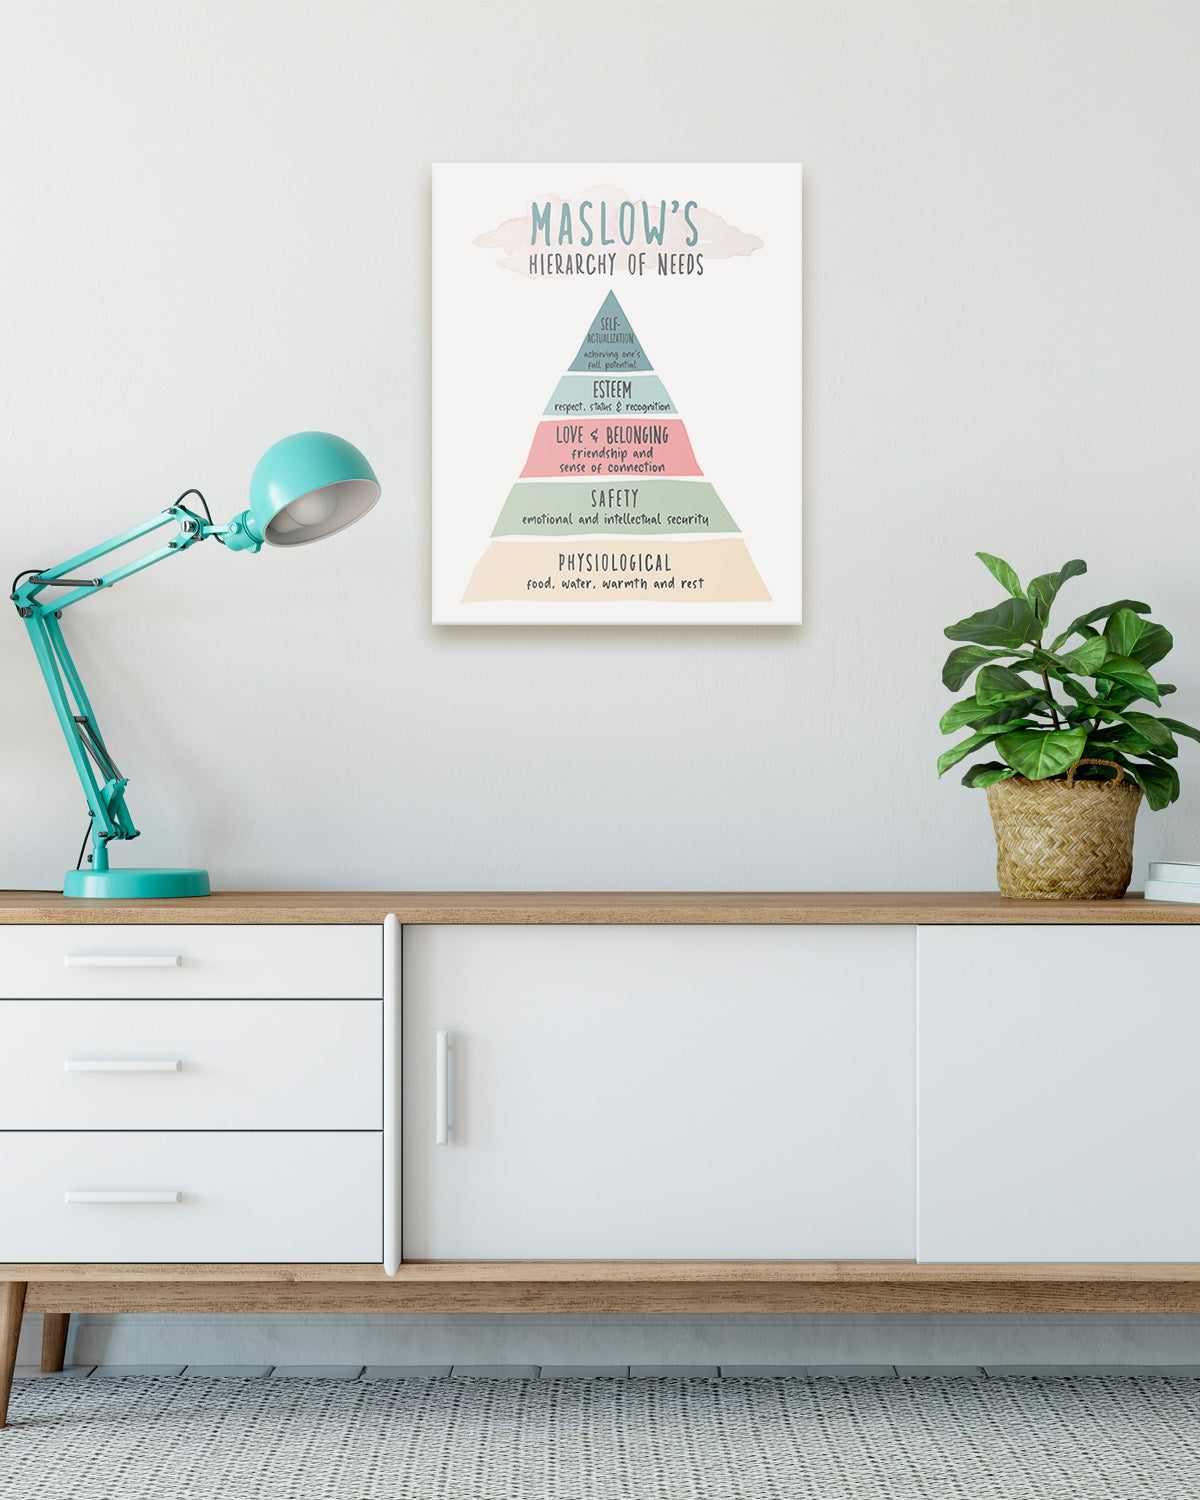 Maslows Hierarchy Of Needs - Psychotherapy or Psychologist Wall Art - Therapist Office Decor - Mental Health Home Wall Decor - Living Room and Bedroom Decor